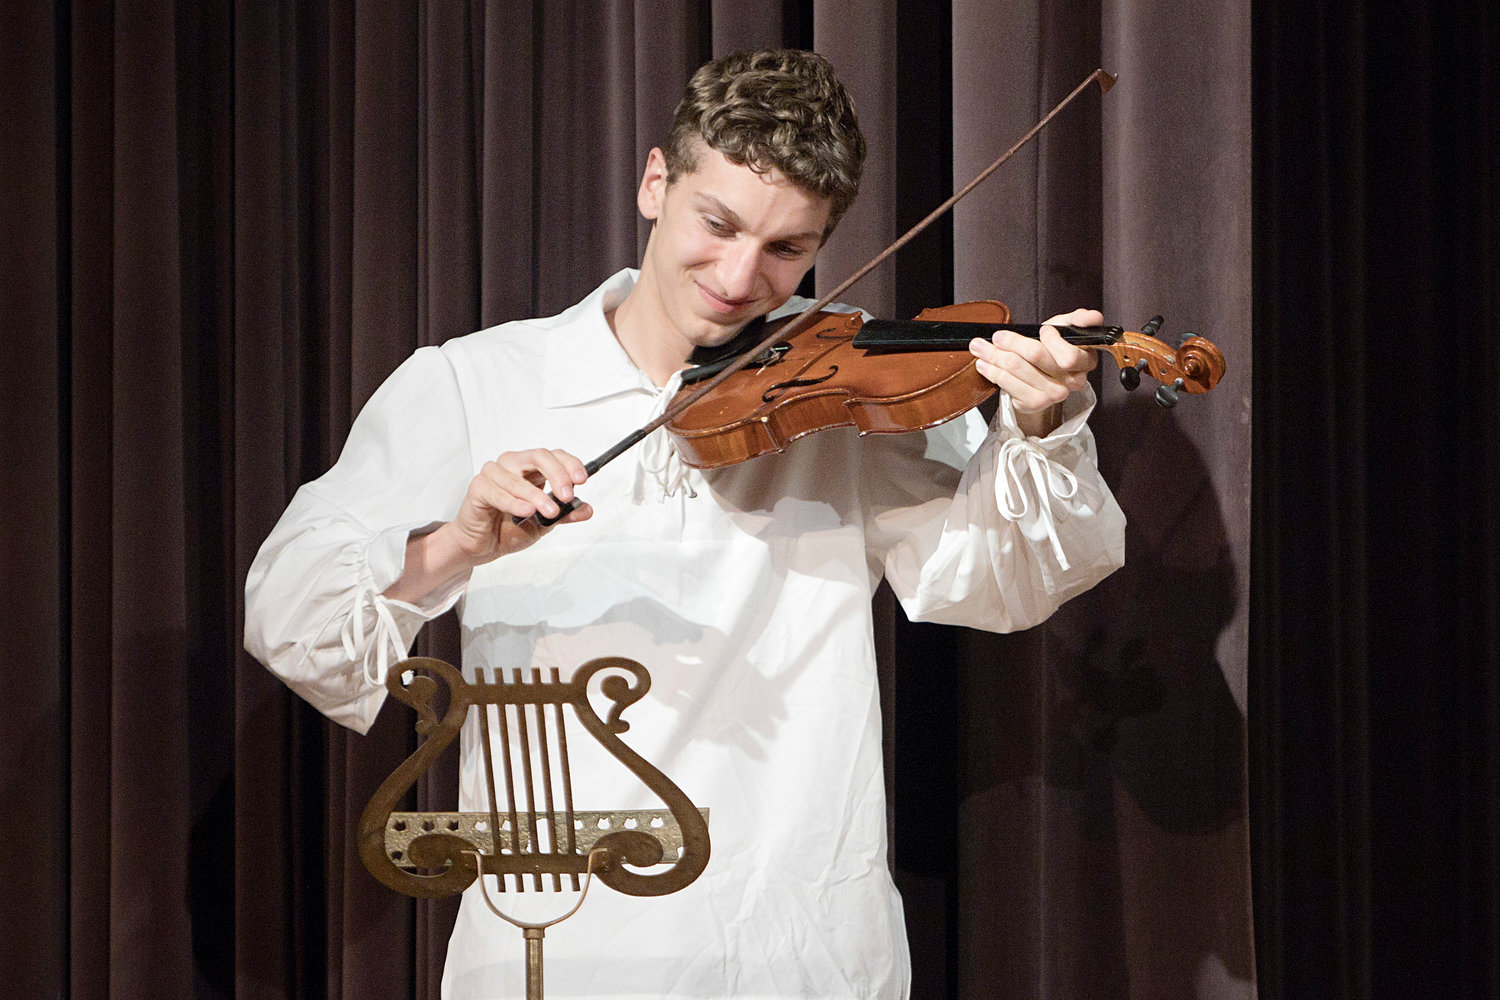 Matthew Catani plays the fiddle while rehearsing the "Party Scene" of the BHS Stagemaster's Spring play "Sleepy Hollow: Ichabod and the Headless Horseman.”